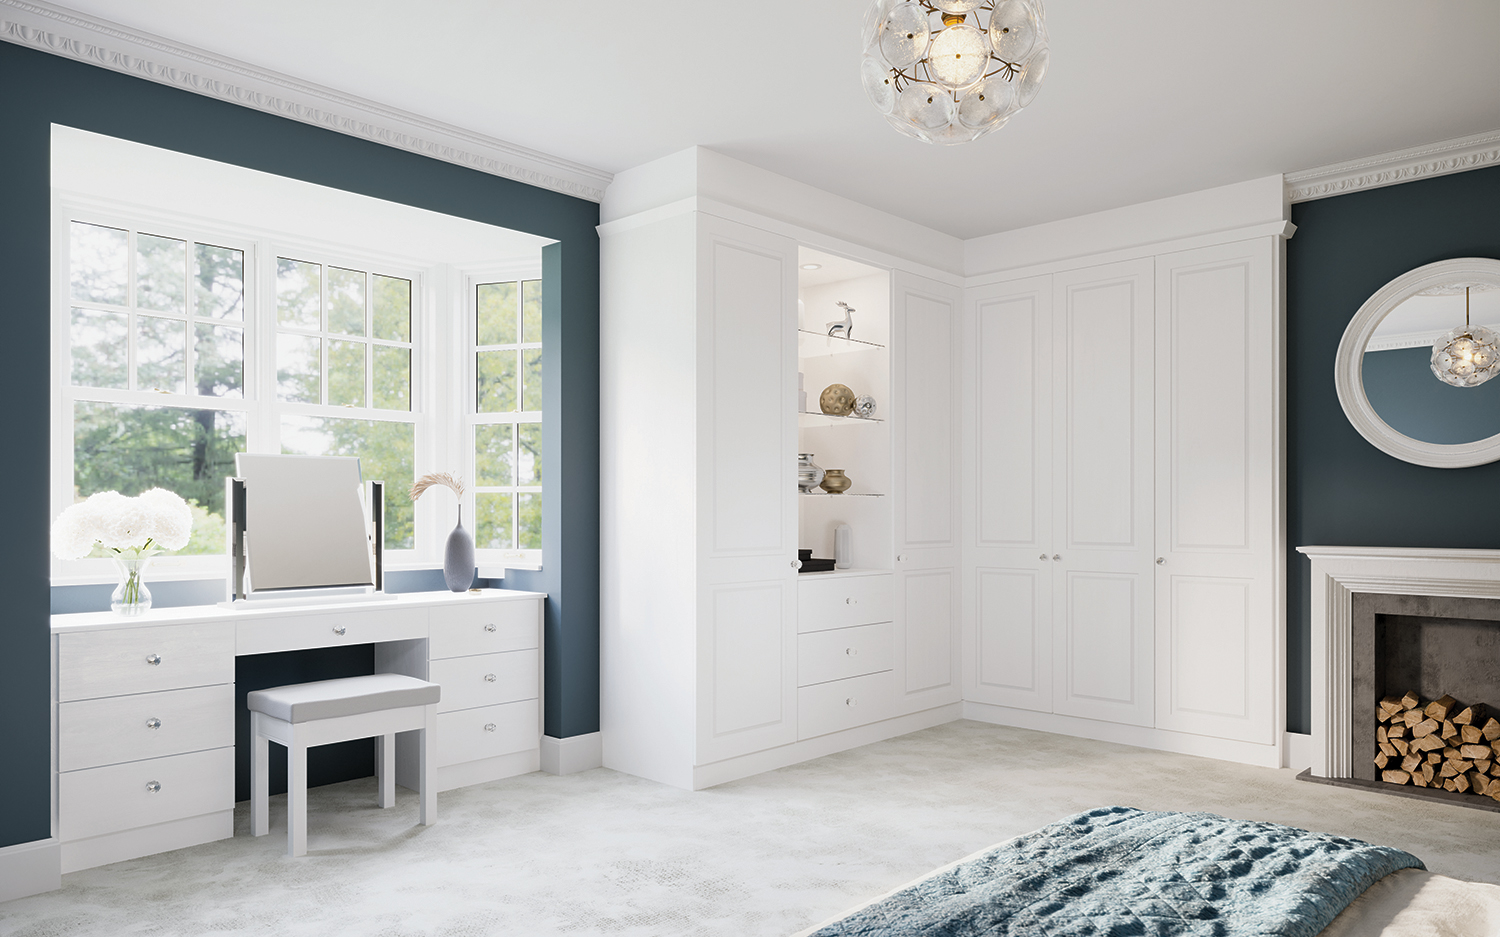 bedroom design with open shelving in light colours, dressing table below window